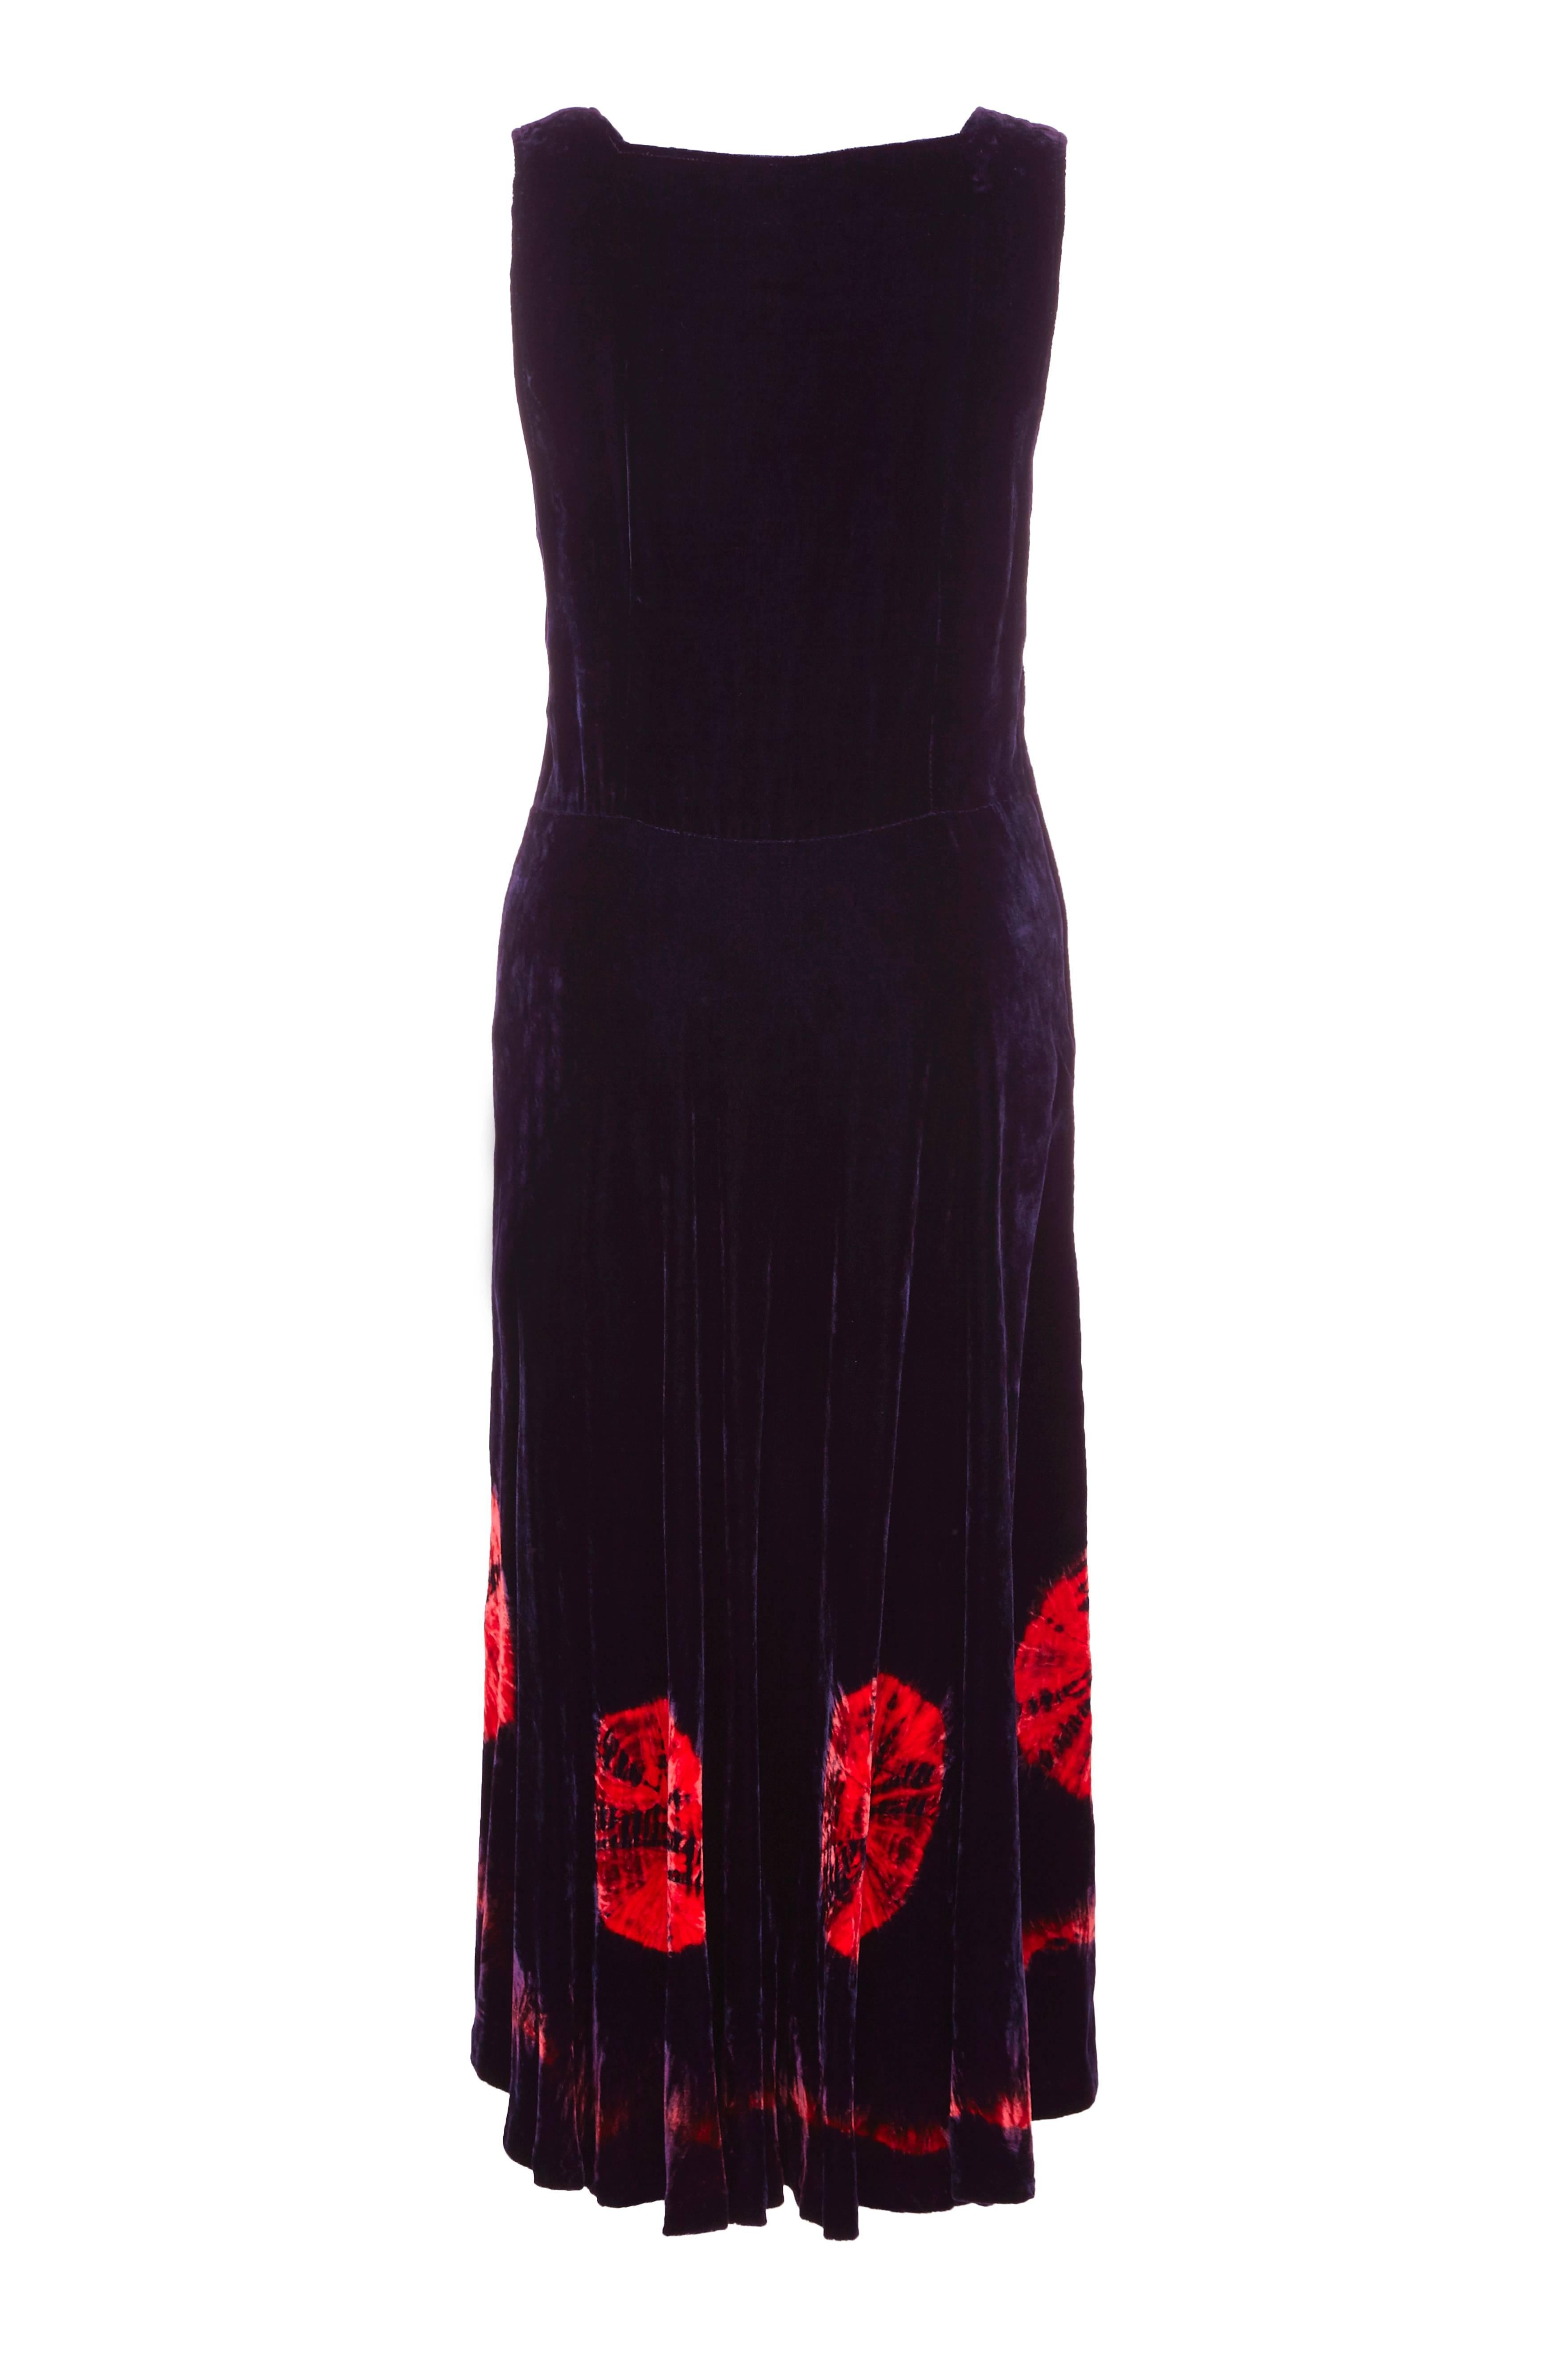 Beautiful vintage late 1960s or early 1970s dress in deep purple with bold orange/red tie-dye pattern on the front of the bodice and around the hem.  This dress has a very 1940s feel to it with a full calf length skirt and could be easily dressed up